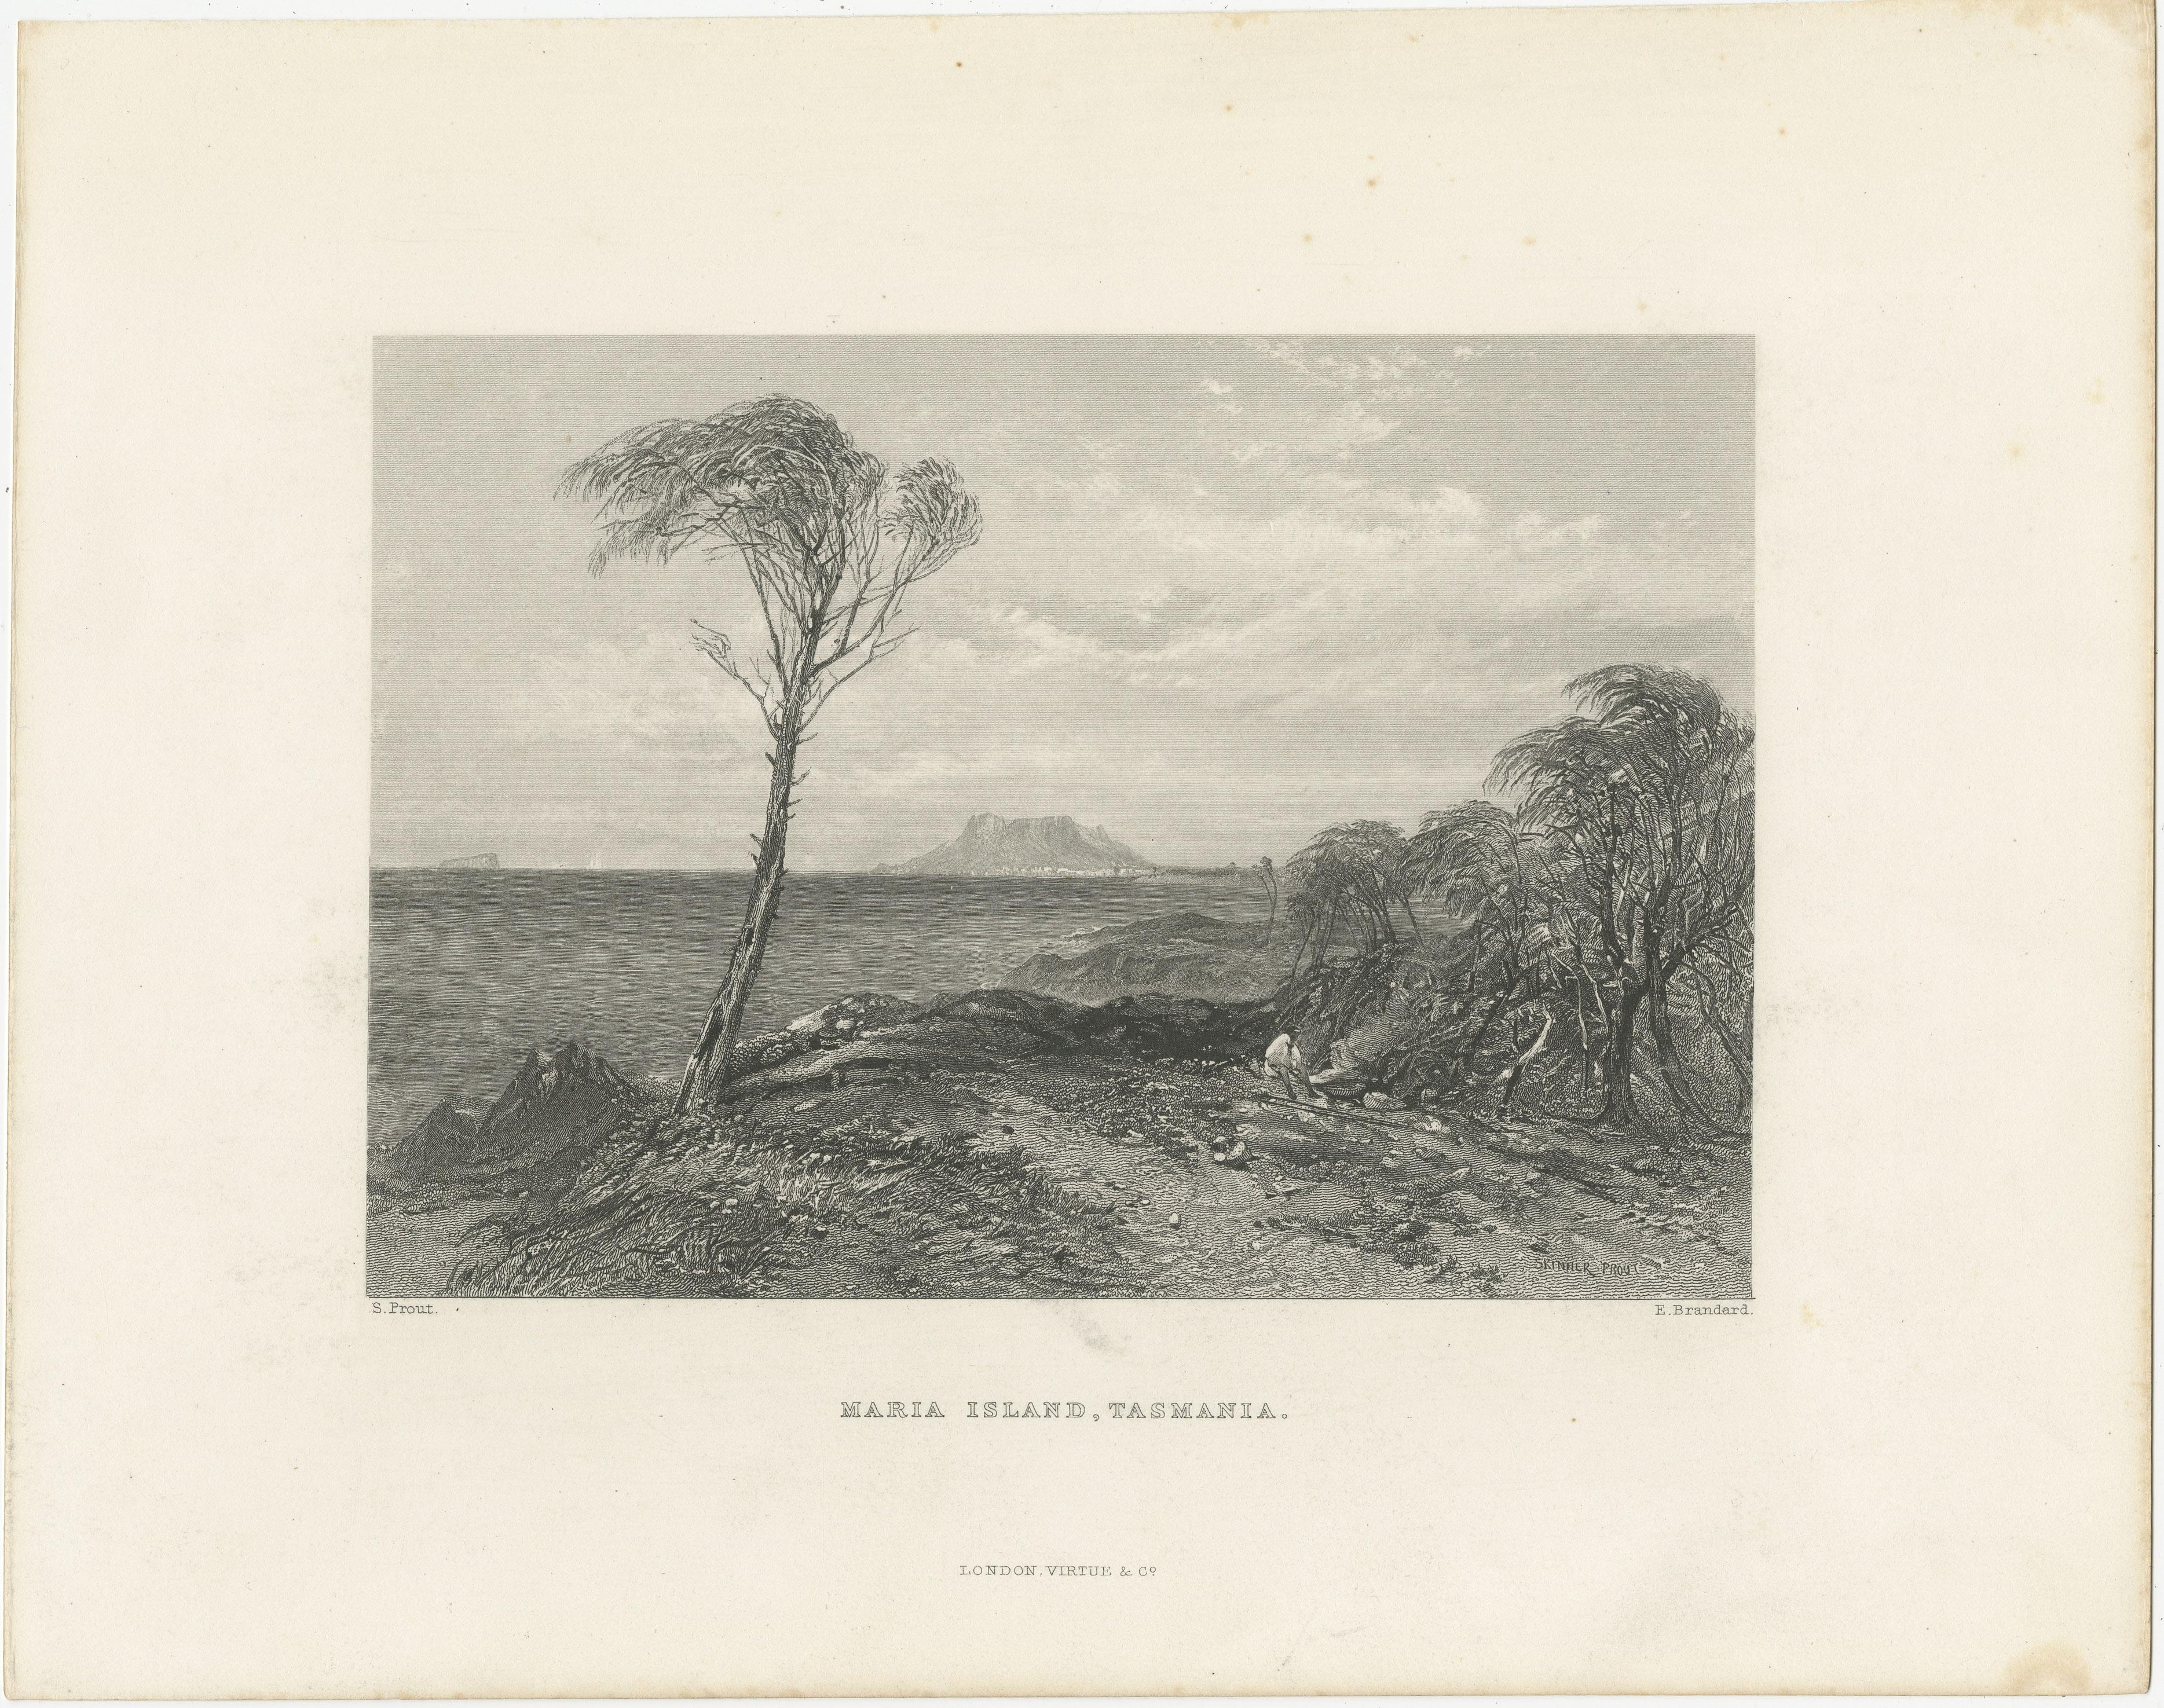 Antique print titled 'Maria Island, Tasmania'. View of Maria Island or 'wukaluwikiwayna', a mountainous island located in the Tasman Sea, off the east coast of Tasmania, Australia. Engraved by T. Heawood after S. Prout. Published by Virtue & Co,